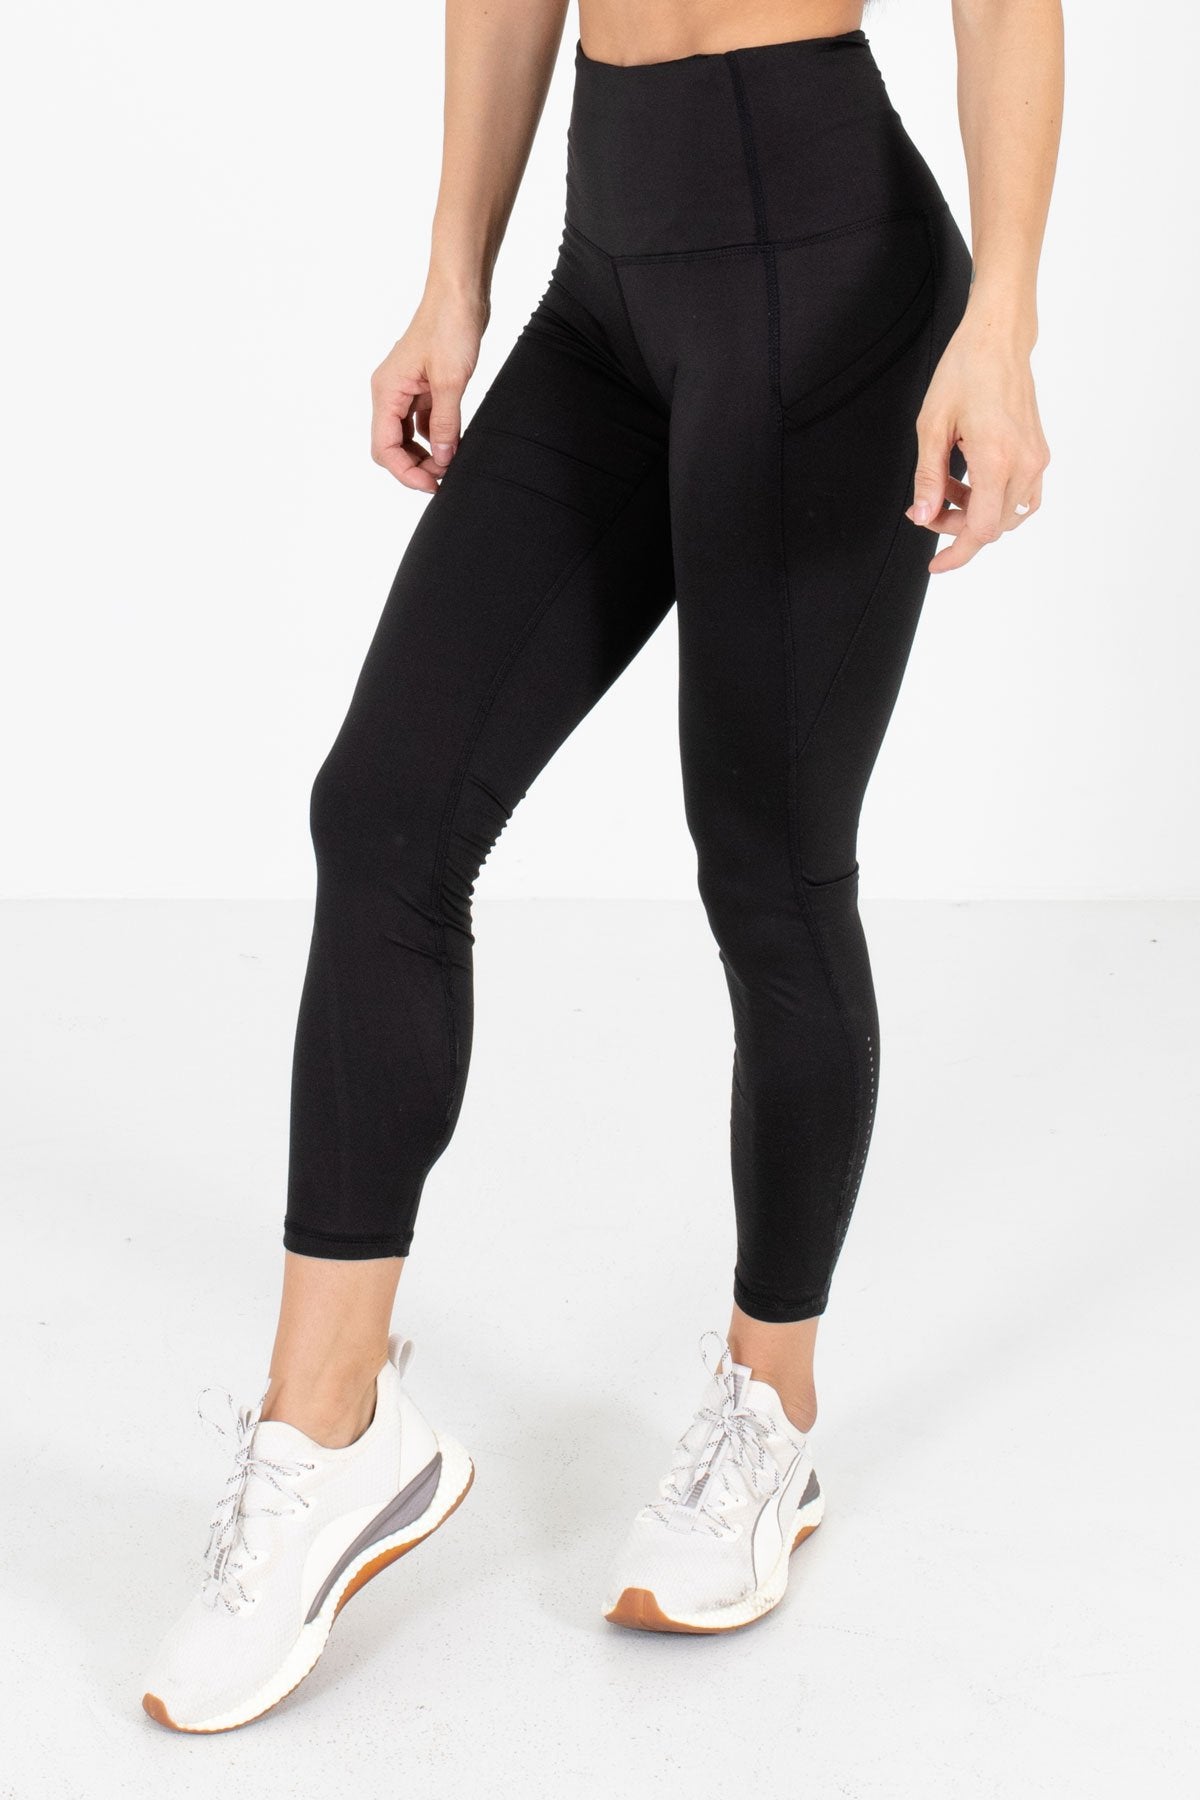 Black High Waisted Style Boutique Active Leggings for Women